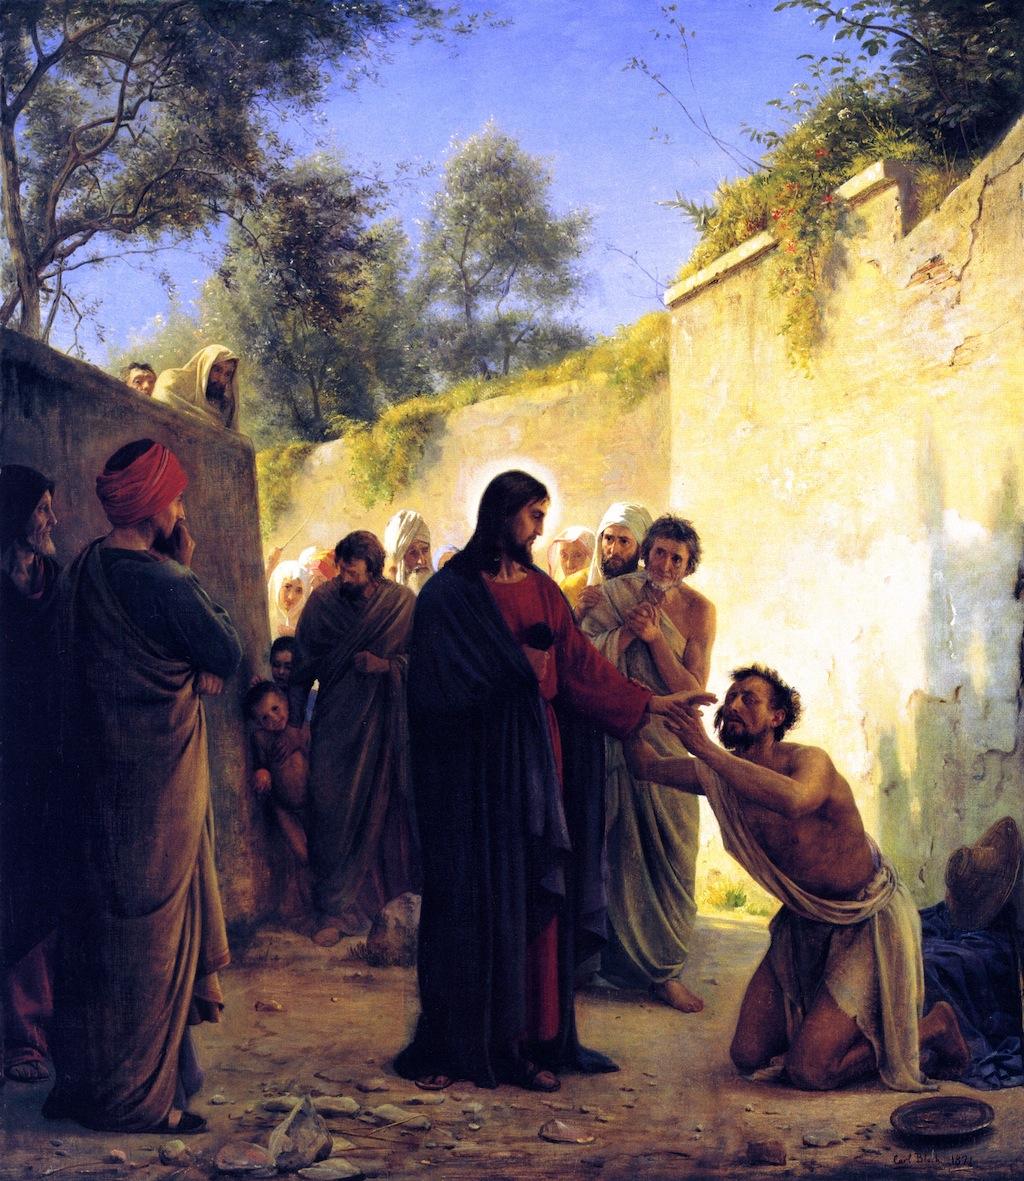 Healing of the Blind Man by Carl Bloch Directions: Take a moment to view the painting Healing of the